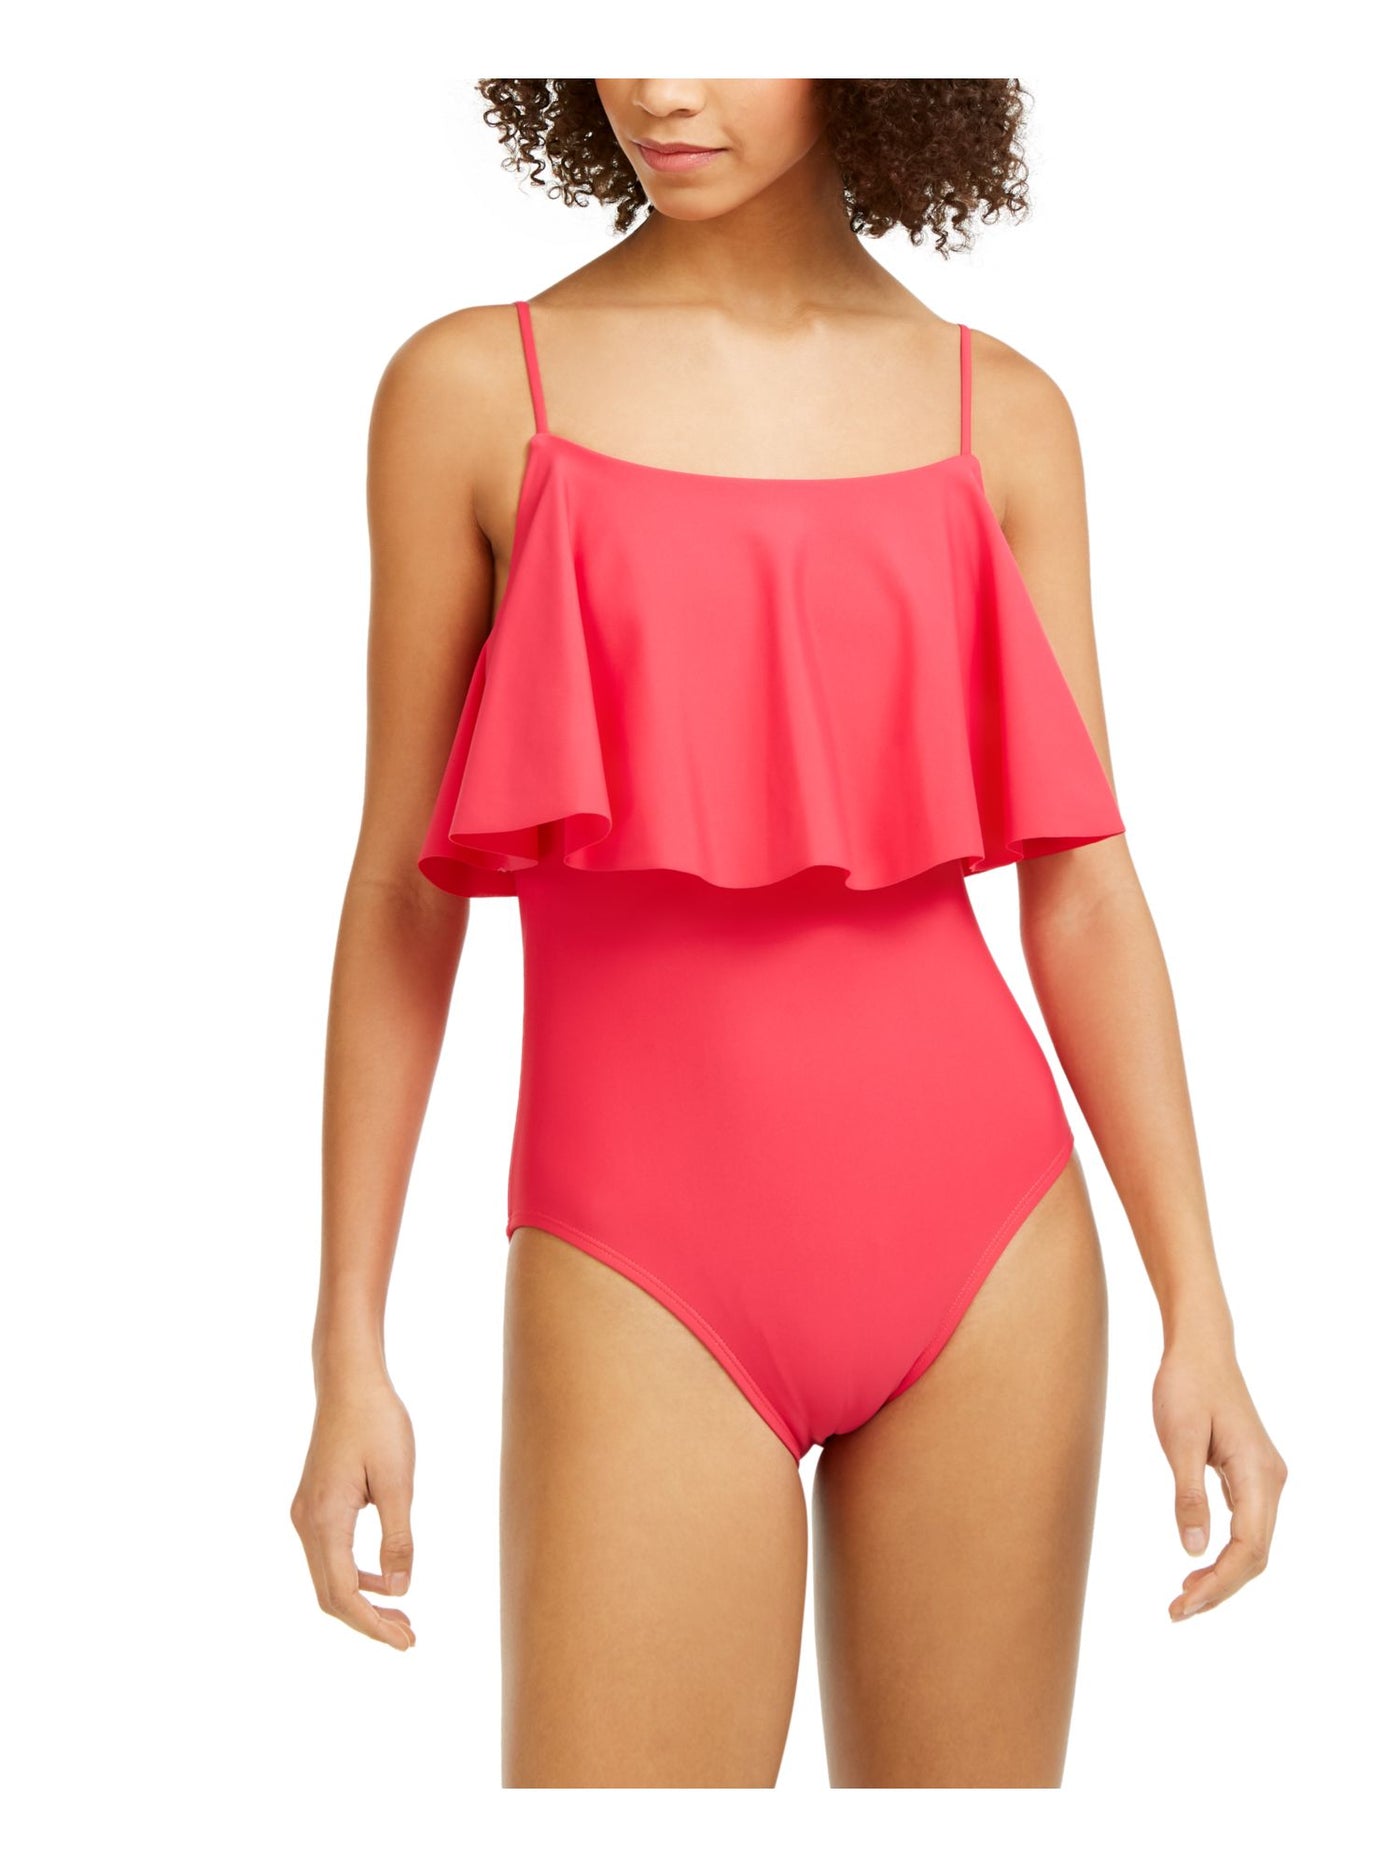 TOMMY HILFIGER Women's Pink Stretch Flutter Removable Cups Moderate Coverage Adjustable One Piece Swimsuit 4